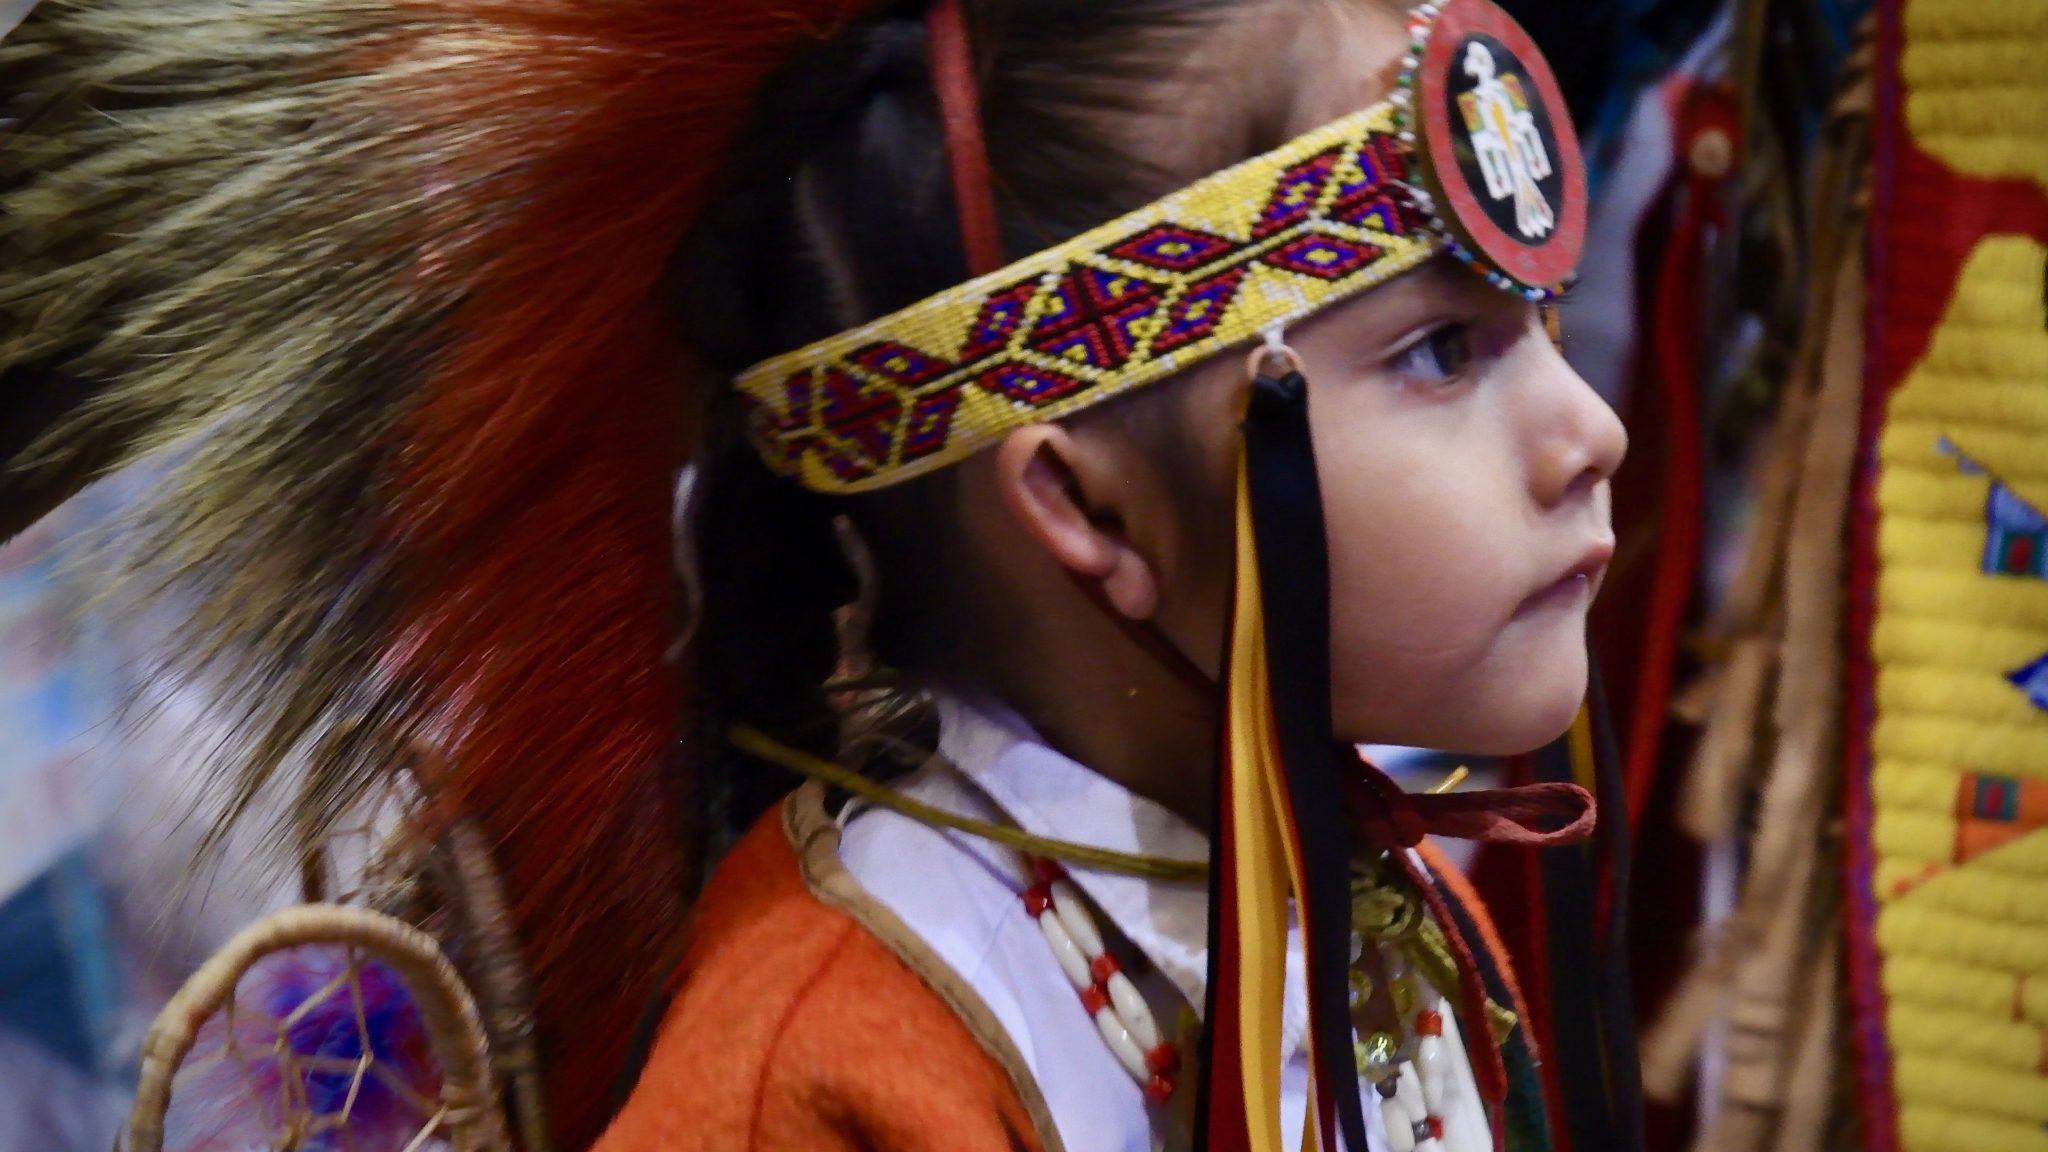 A young member of the Sioux Nation participates in the annual Black Hills Powwow.